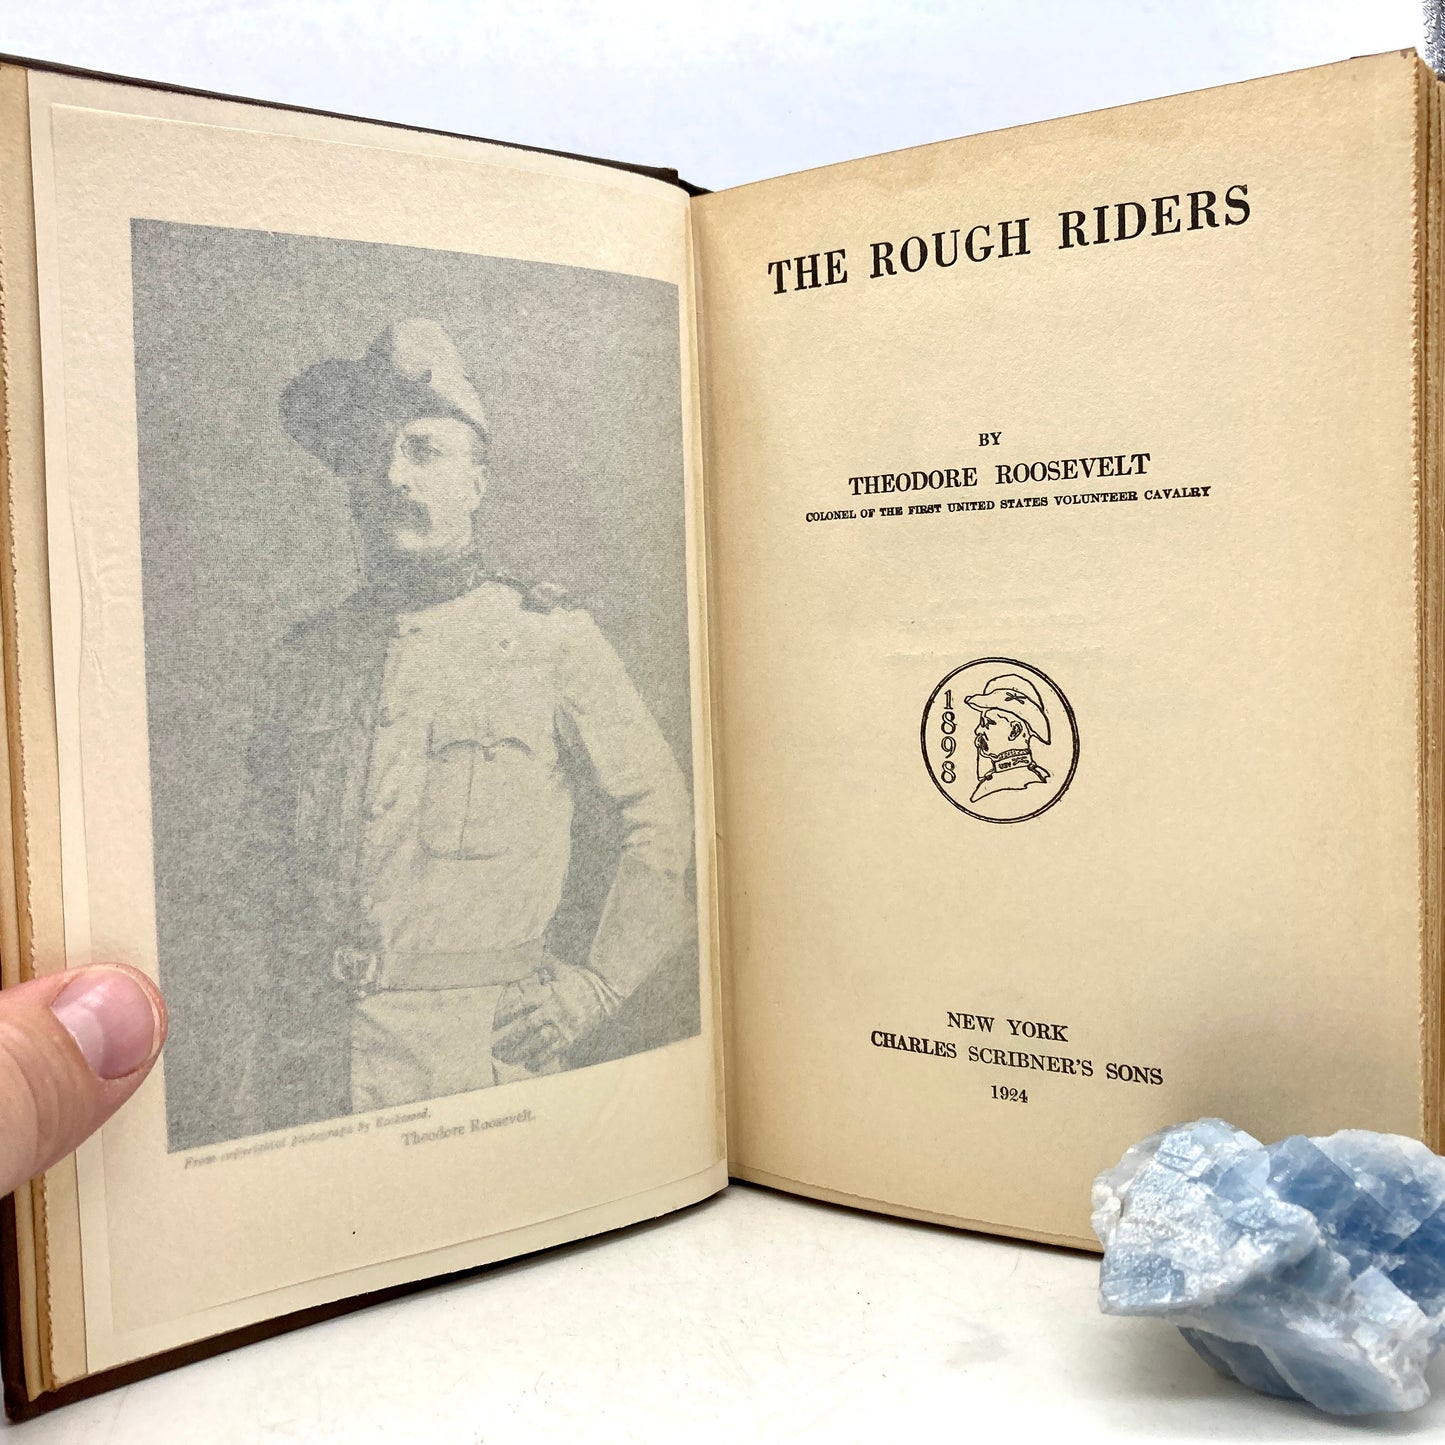 ROOSEVELT, Theodore "The Rough Riders" [Scribners, 1924]